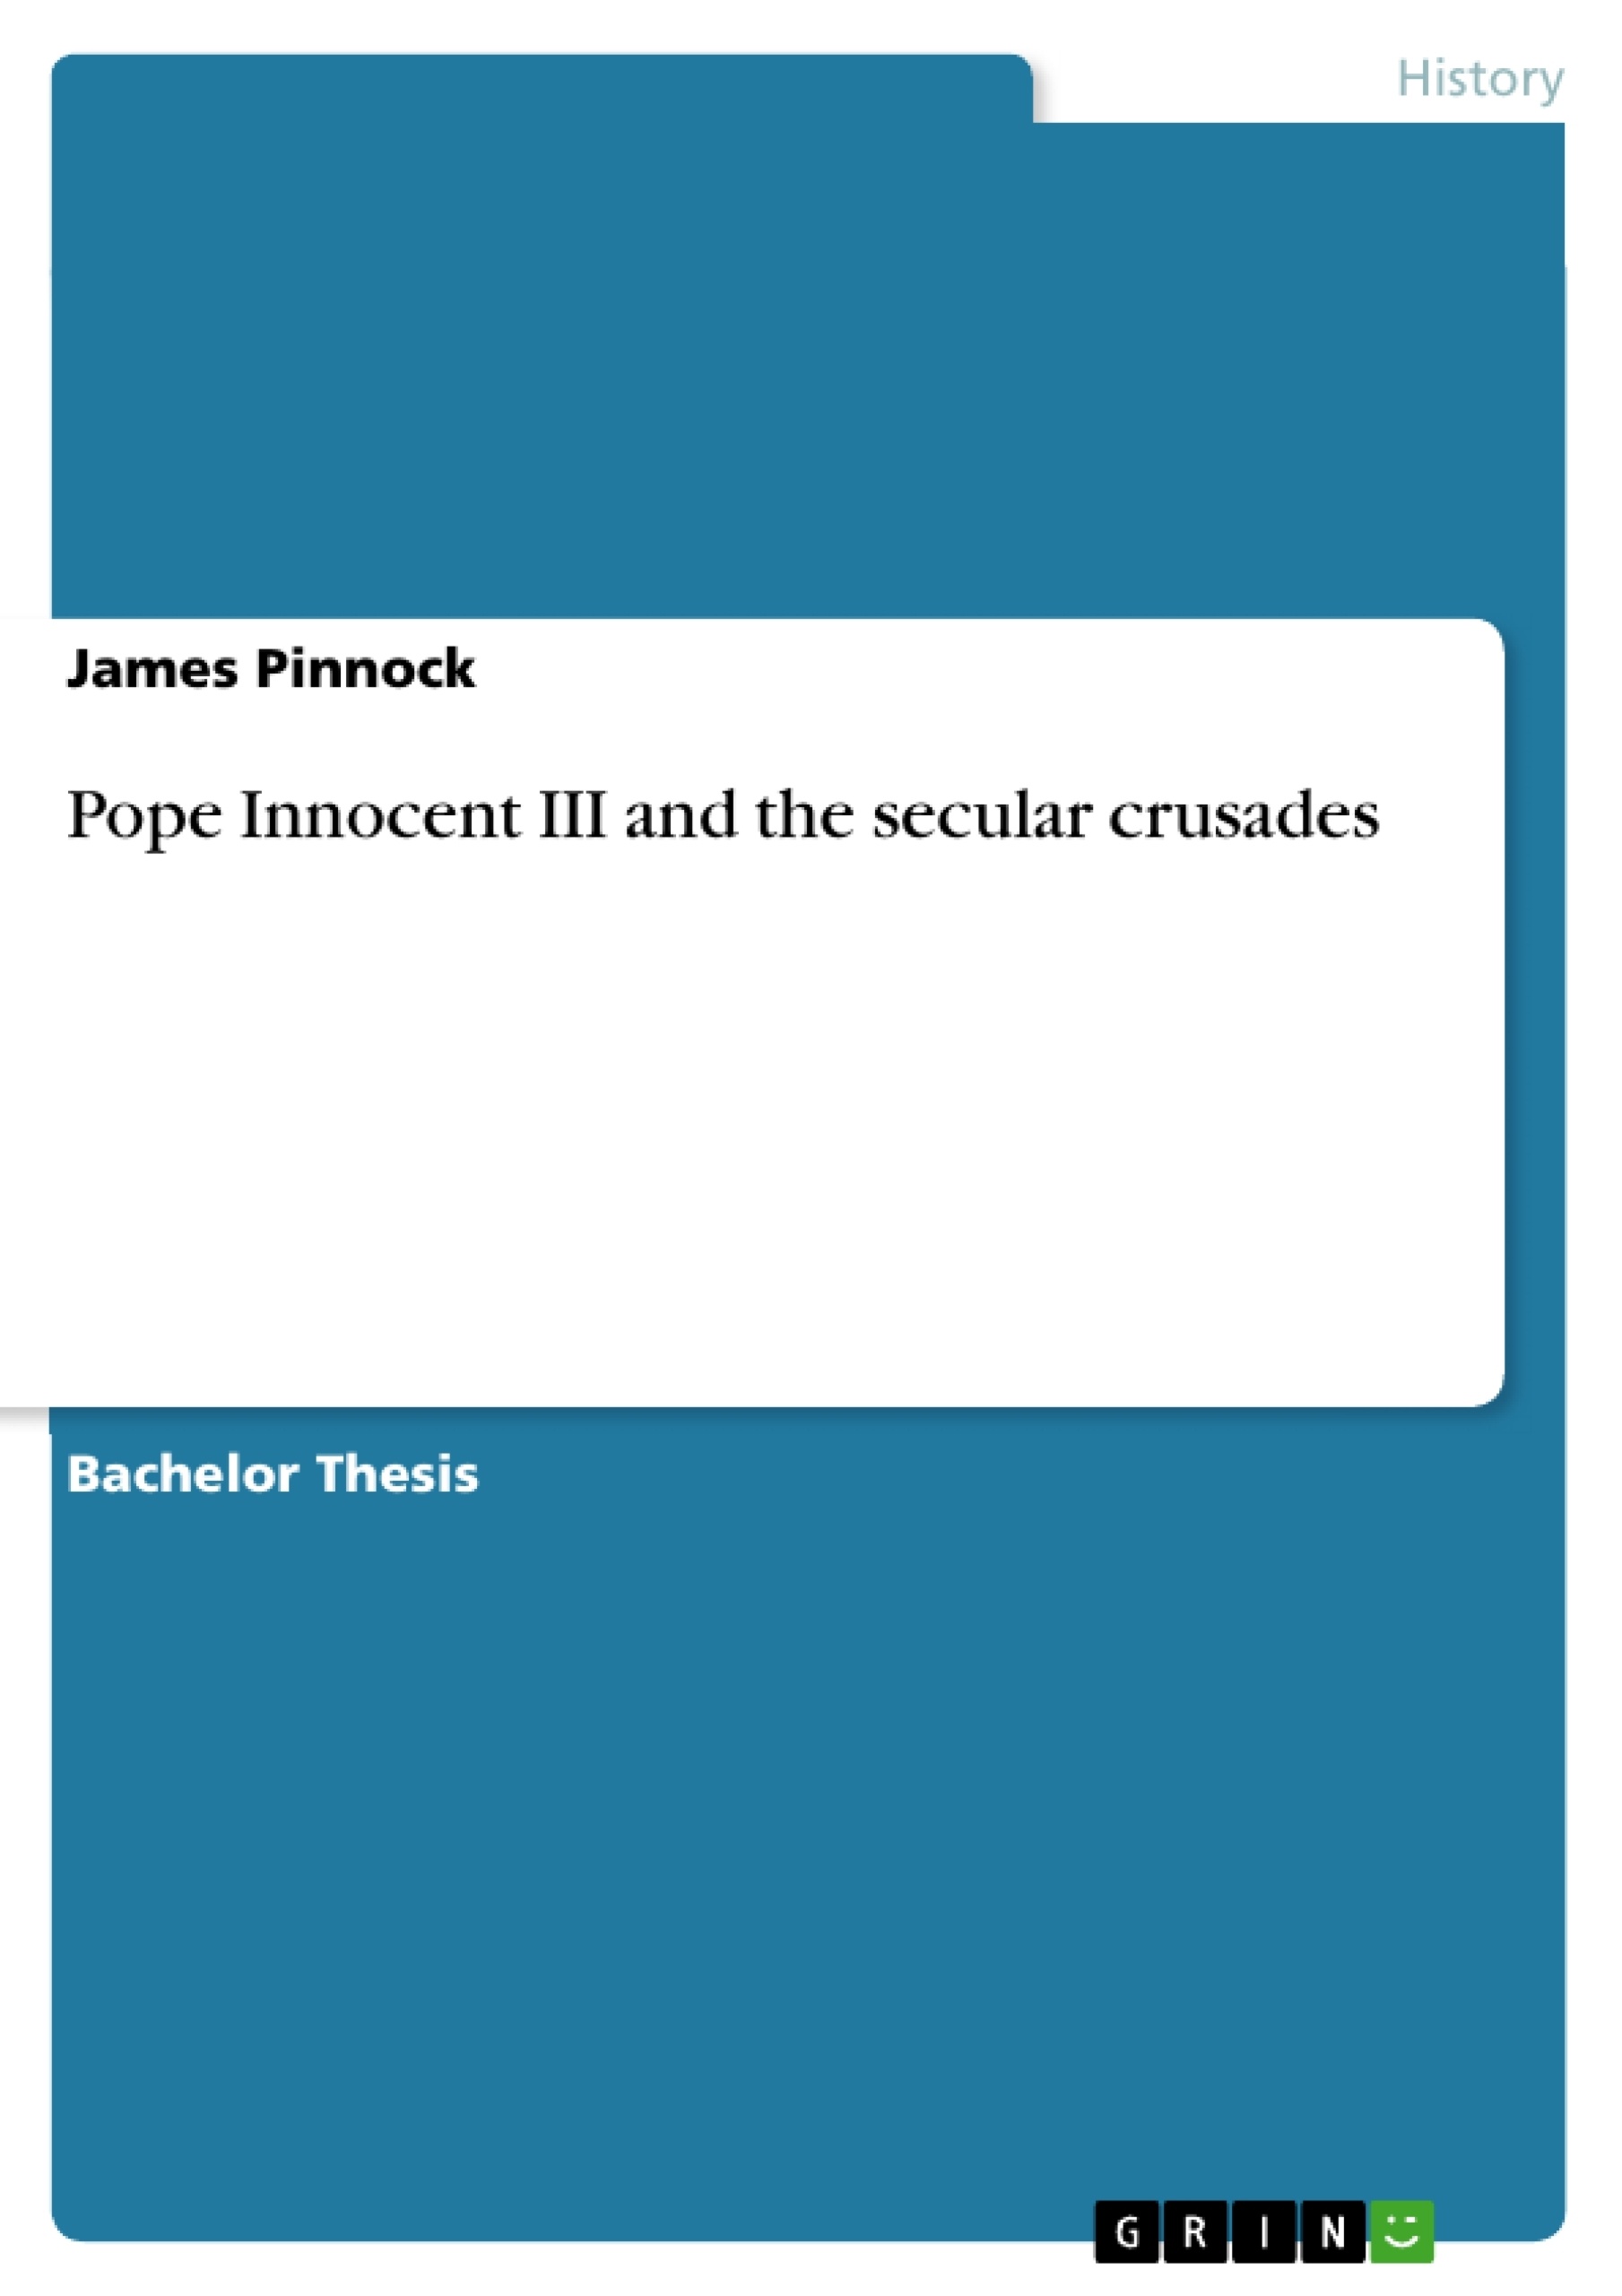 Title: Pope Innocent III and the secular crusades